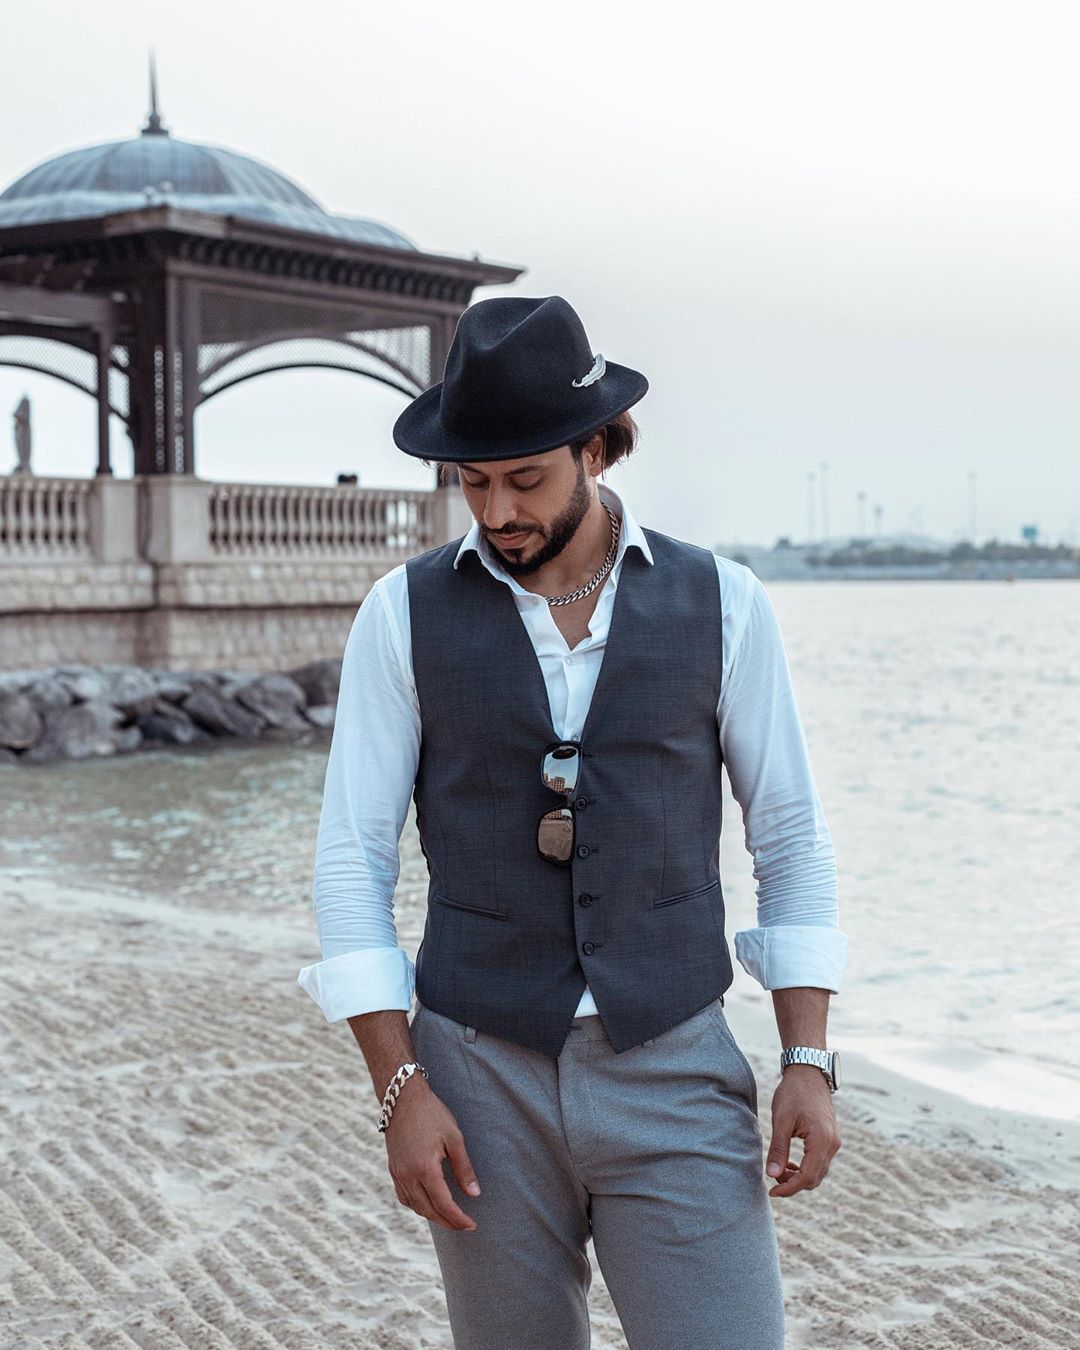 Ready to capture your best self with stunning photography? Contact our talented men's photographer in Dubai today to bring your vision to life.